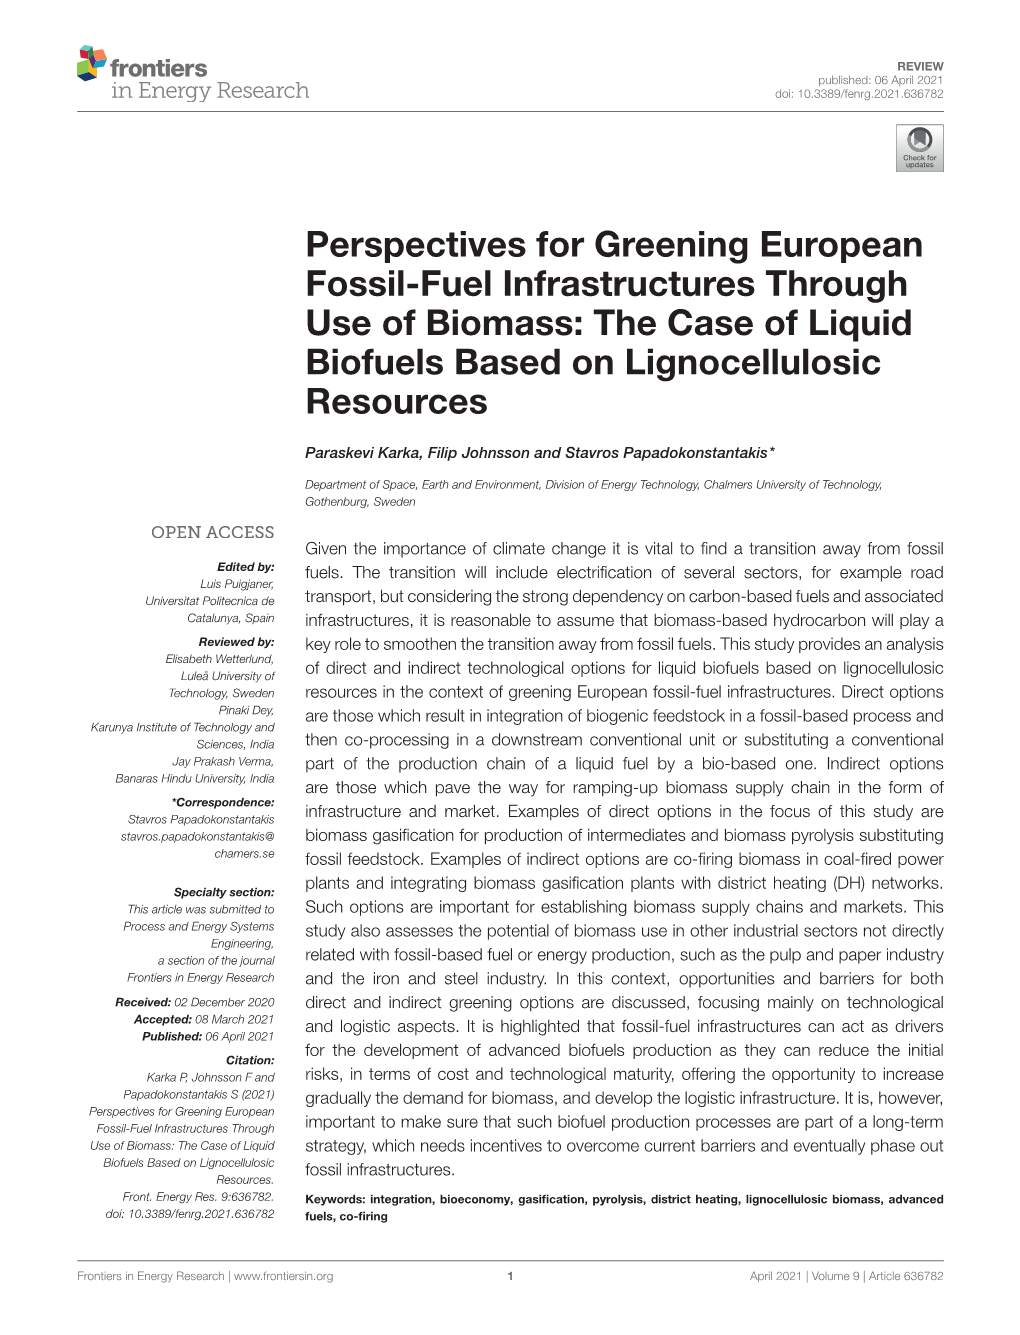 Perspectives for Greening European Fossil-Fuel Infrastructures Through Use of Biomass: the Case of Liquid Biofuels Based on Lignocellulosic Resources